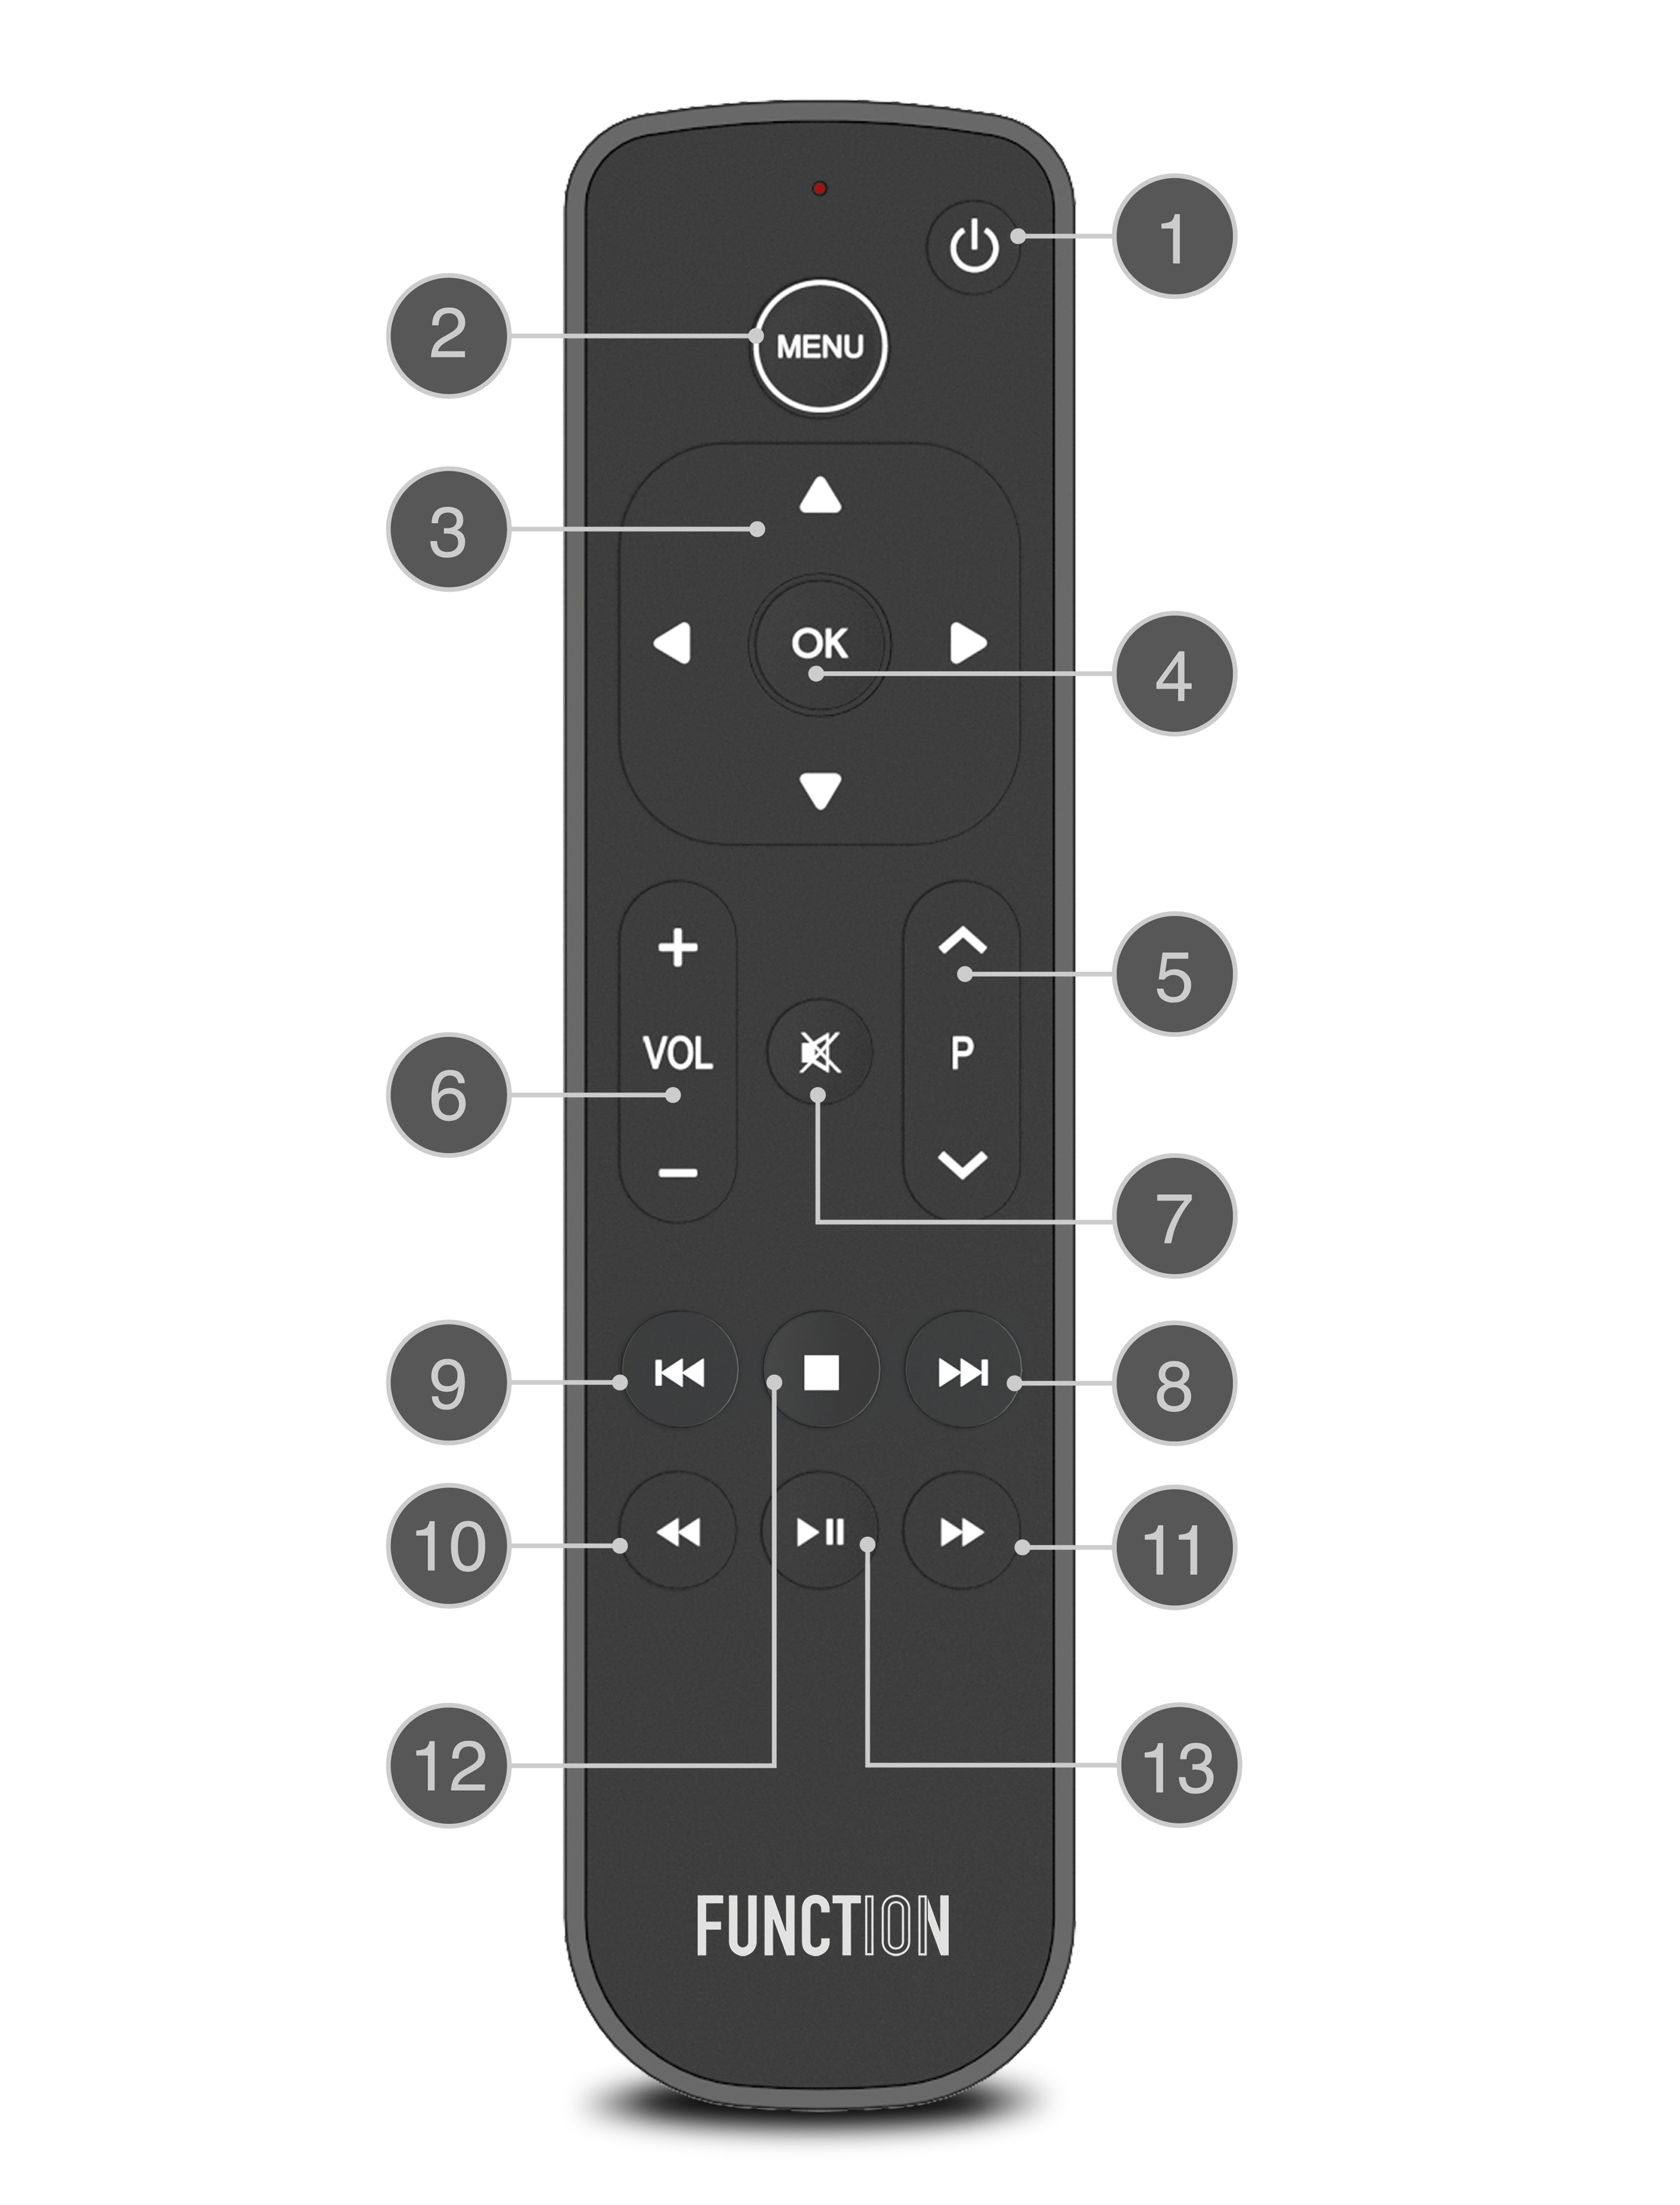 Detailed button guide of our ultimate Apple TV remote replacement